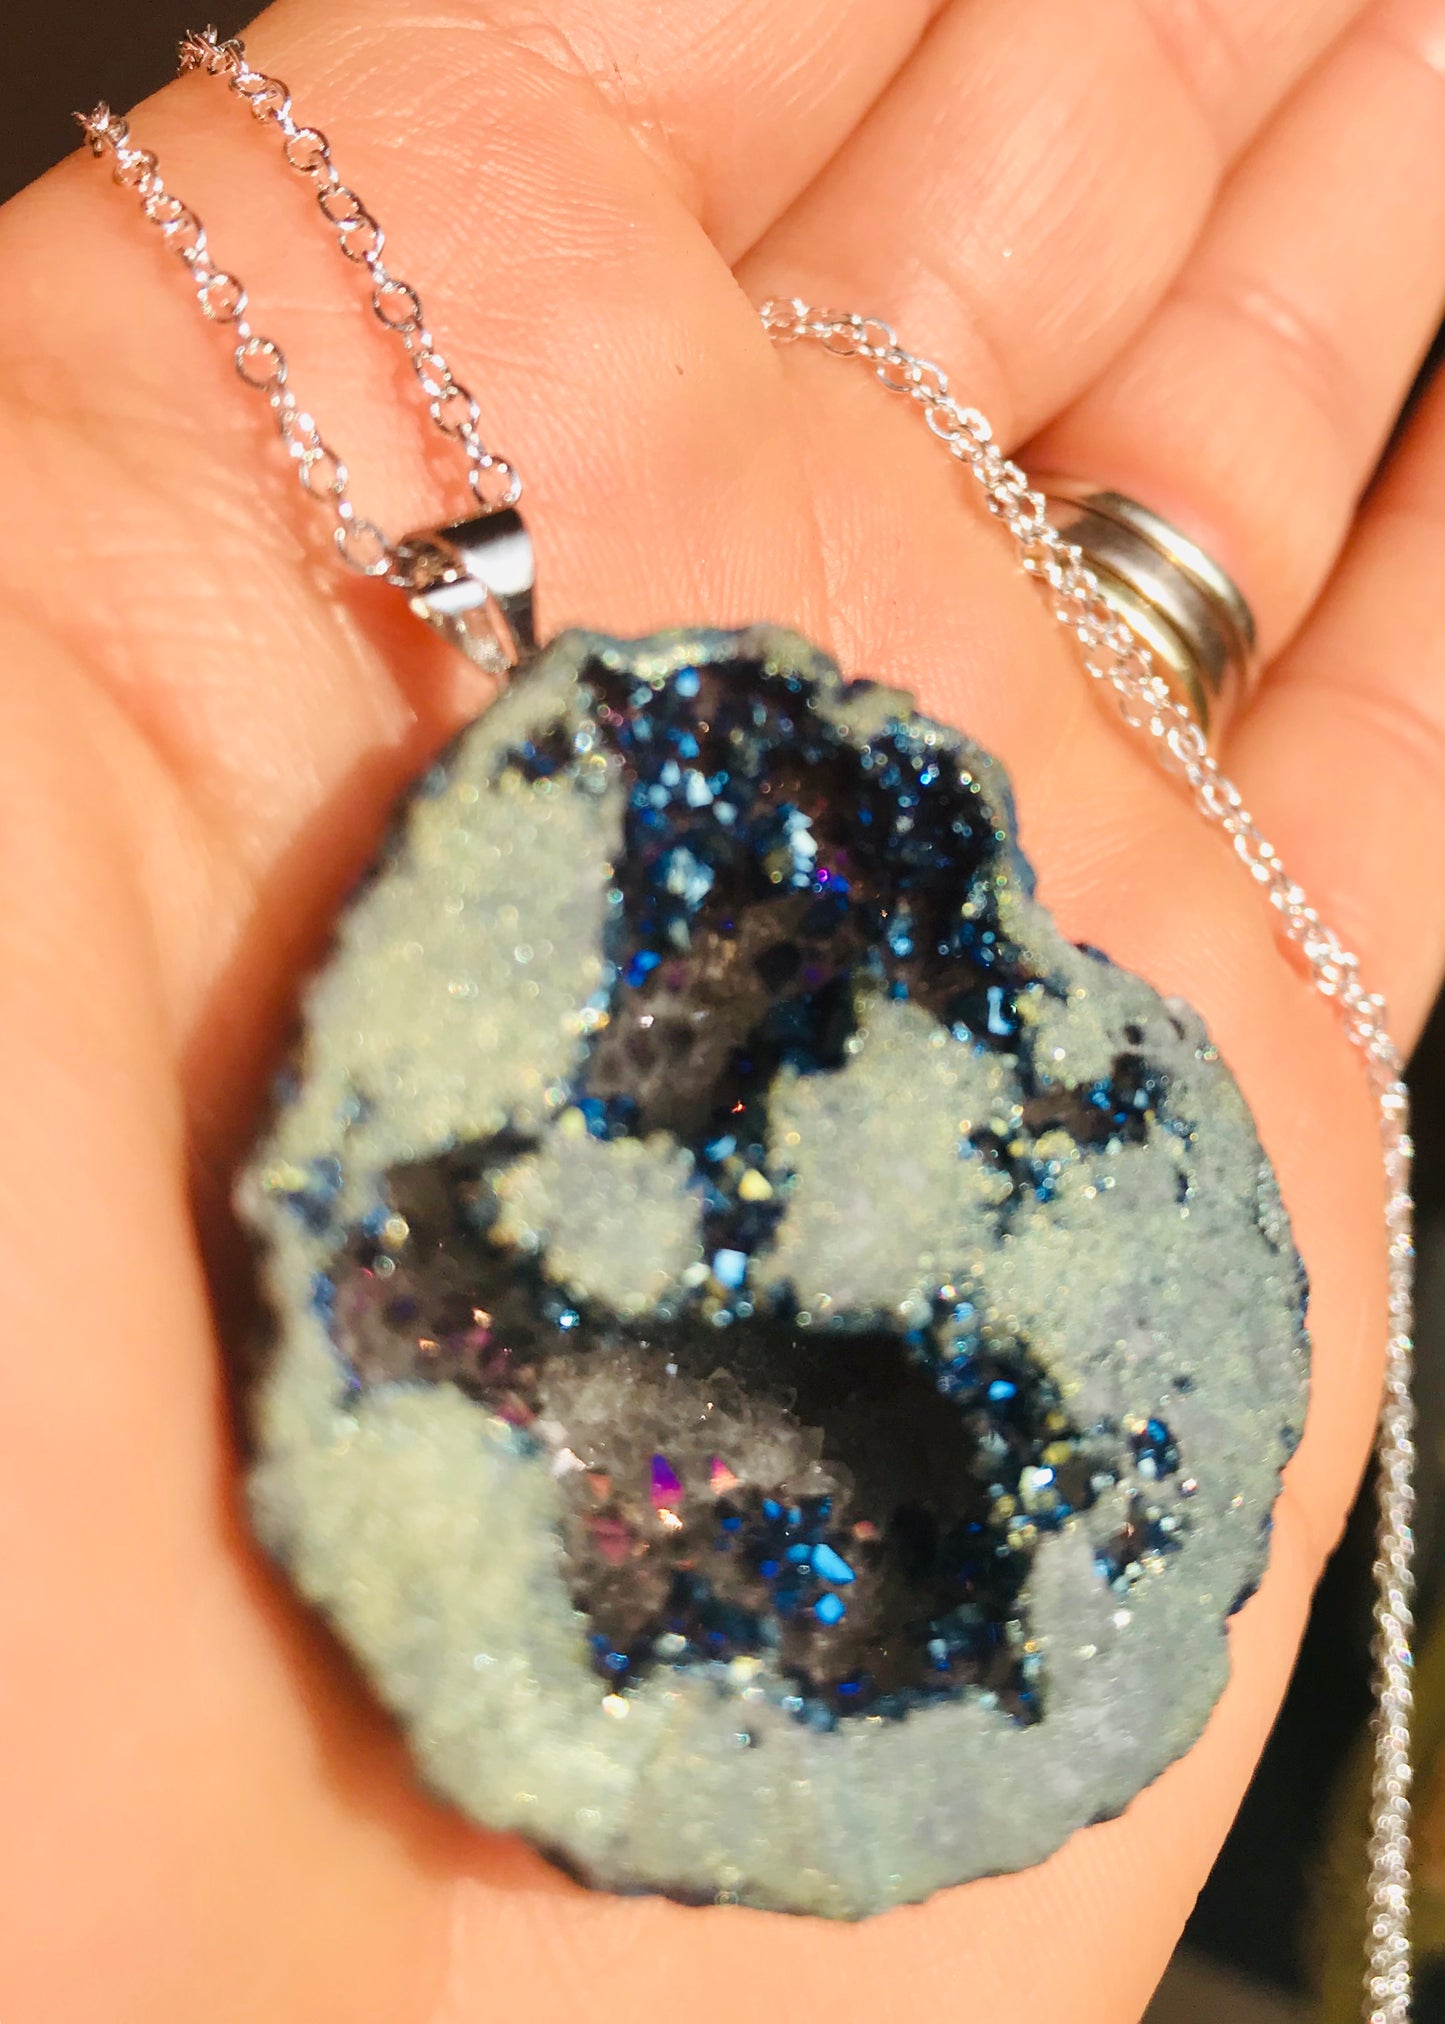 Druzy Crystal Healing Aura Geode Pendant & 925 Silver Rolo Necklace - Rainbow - Crystal Boutique.co.uk 